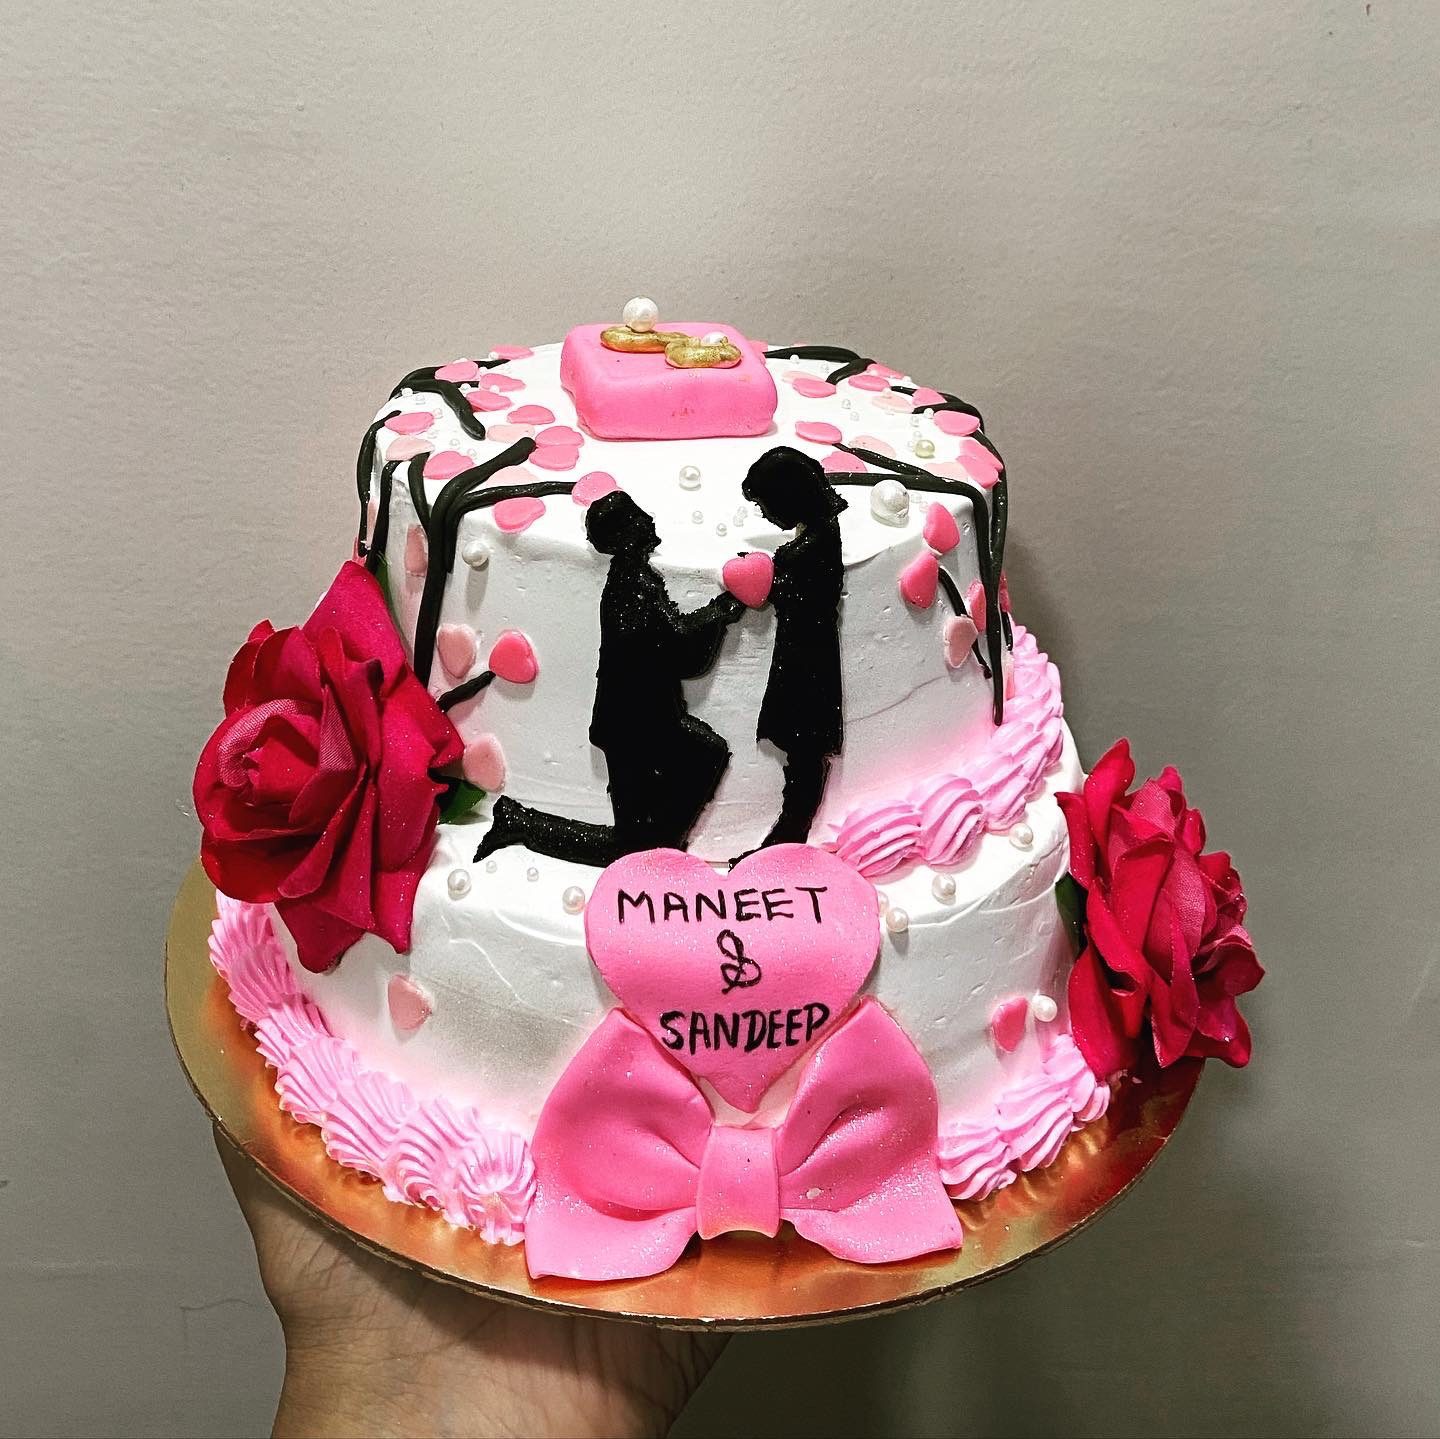 Engagement cake Designs, Images, Price Near Me